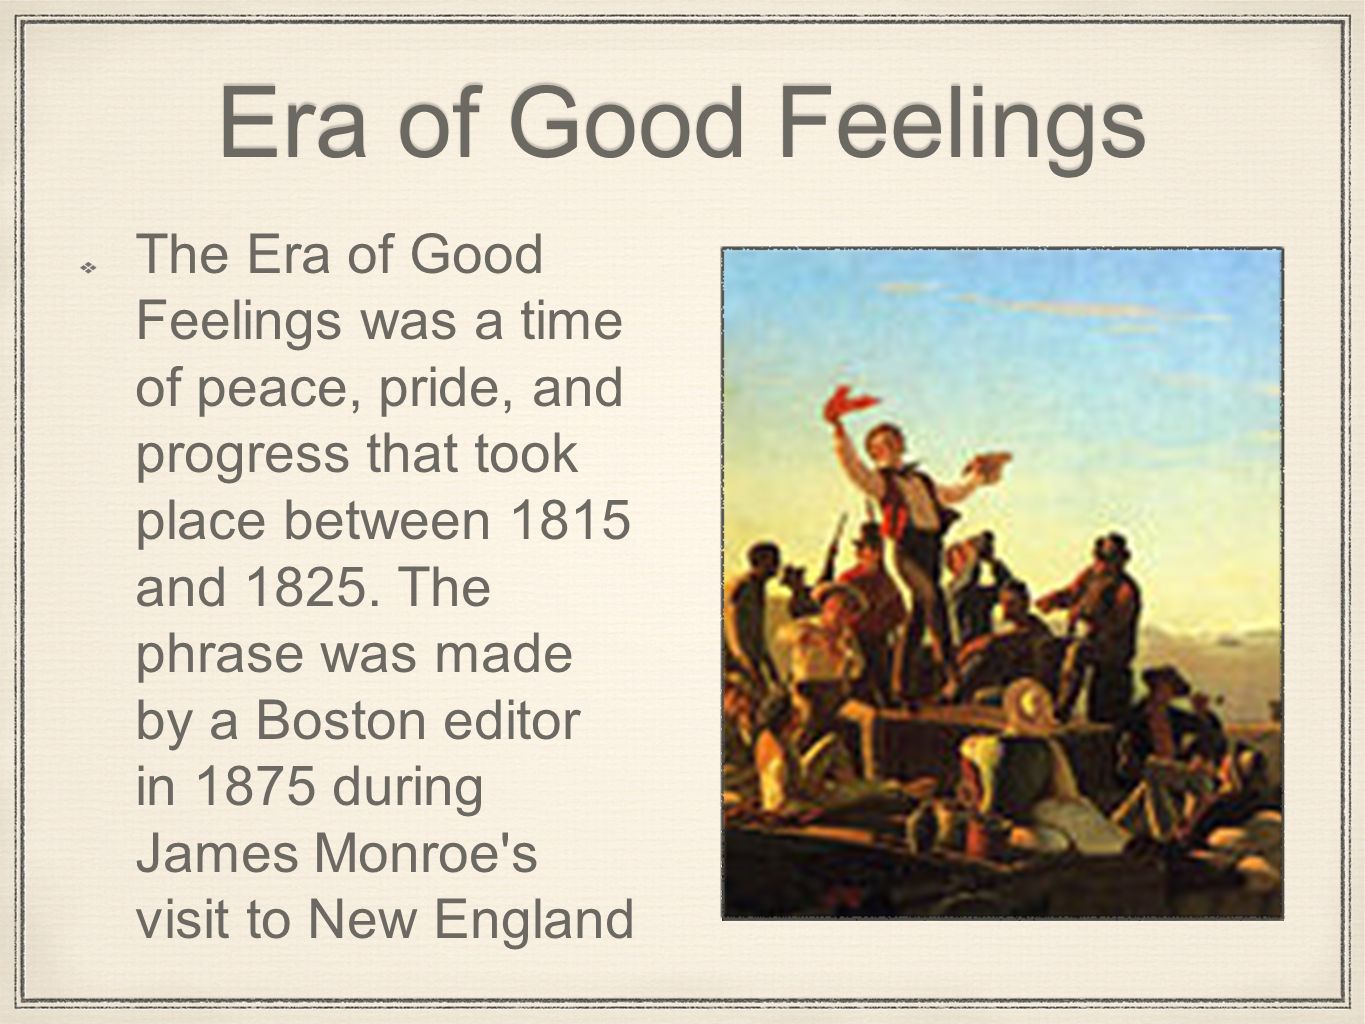 Era of Good Feelings The Era of Good Feelings was a time of peace, pride, and progress that took place between 1815 and 1825.